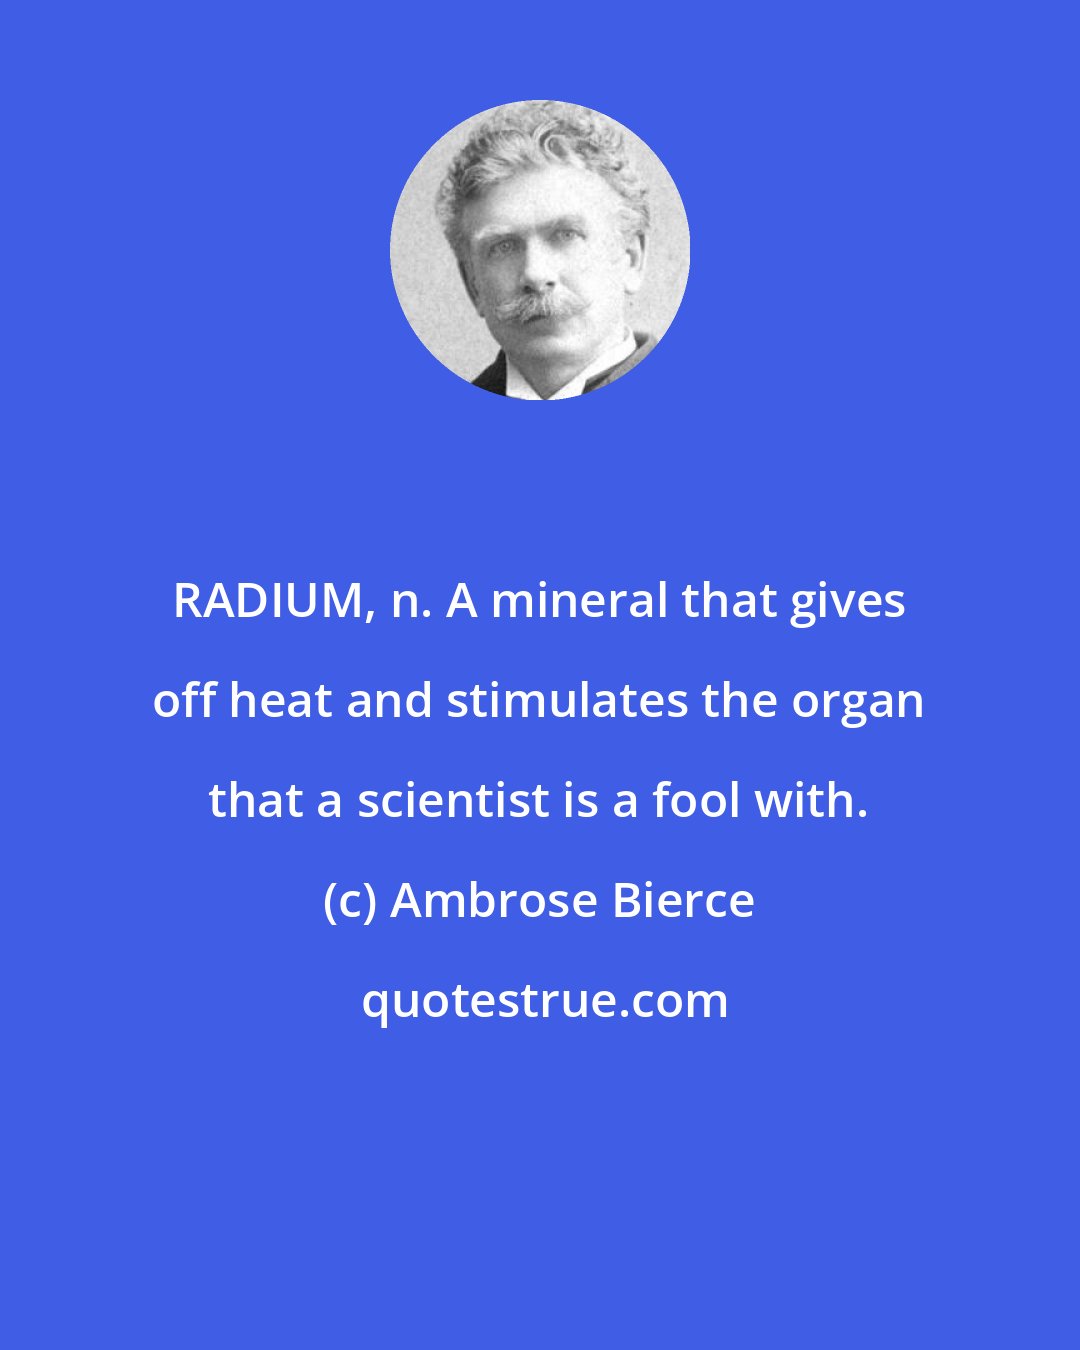 Ambrose Bierce: RADIUM, n. A mineral that gives off heat and stimulates the organ that a scientist is a fool with.